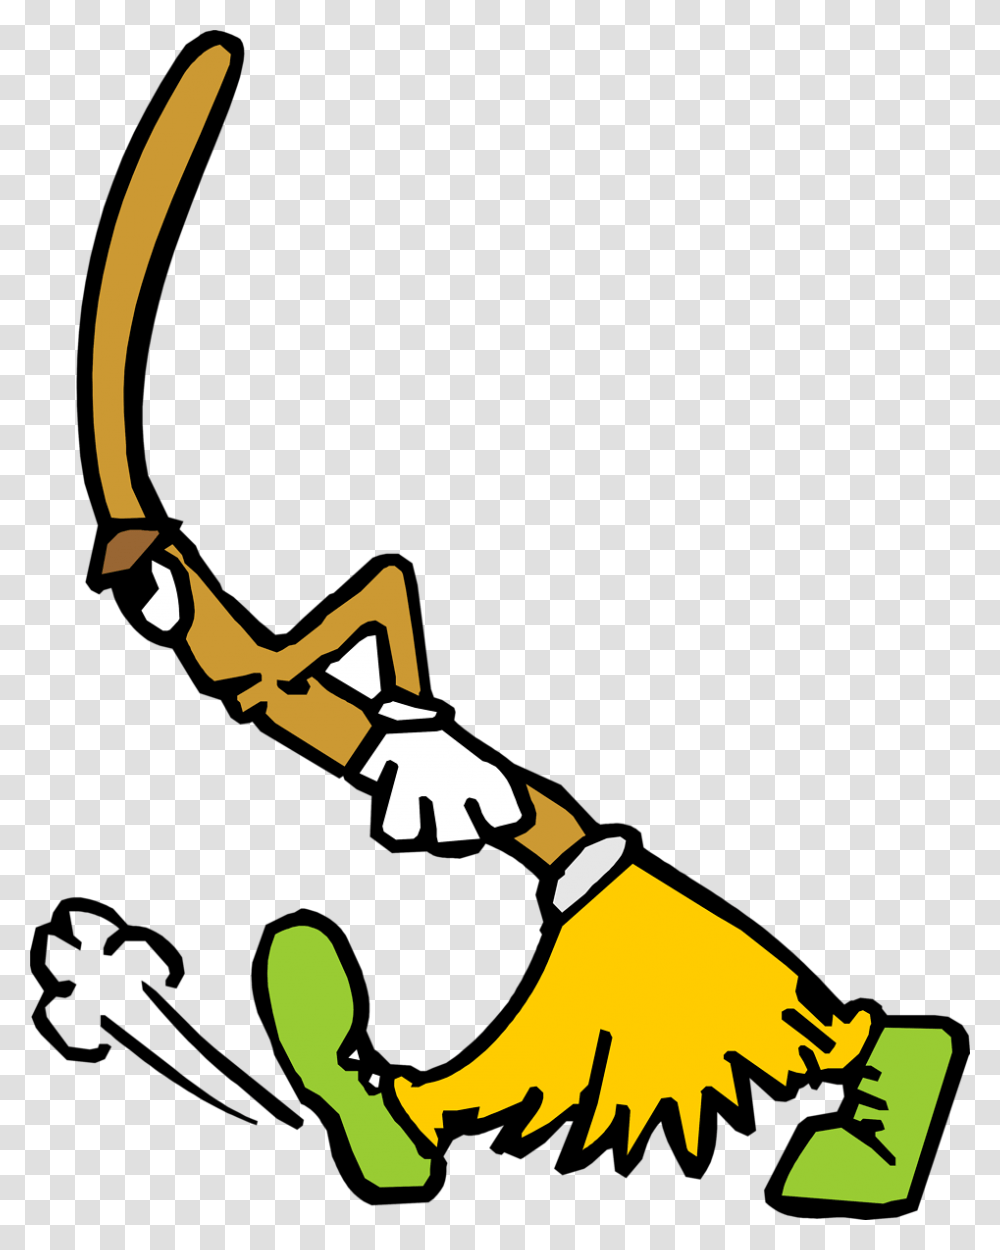 Broom Free Stock Photo Illustration Of An Angry Cartoon Broom Transparent Png